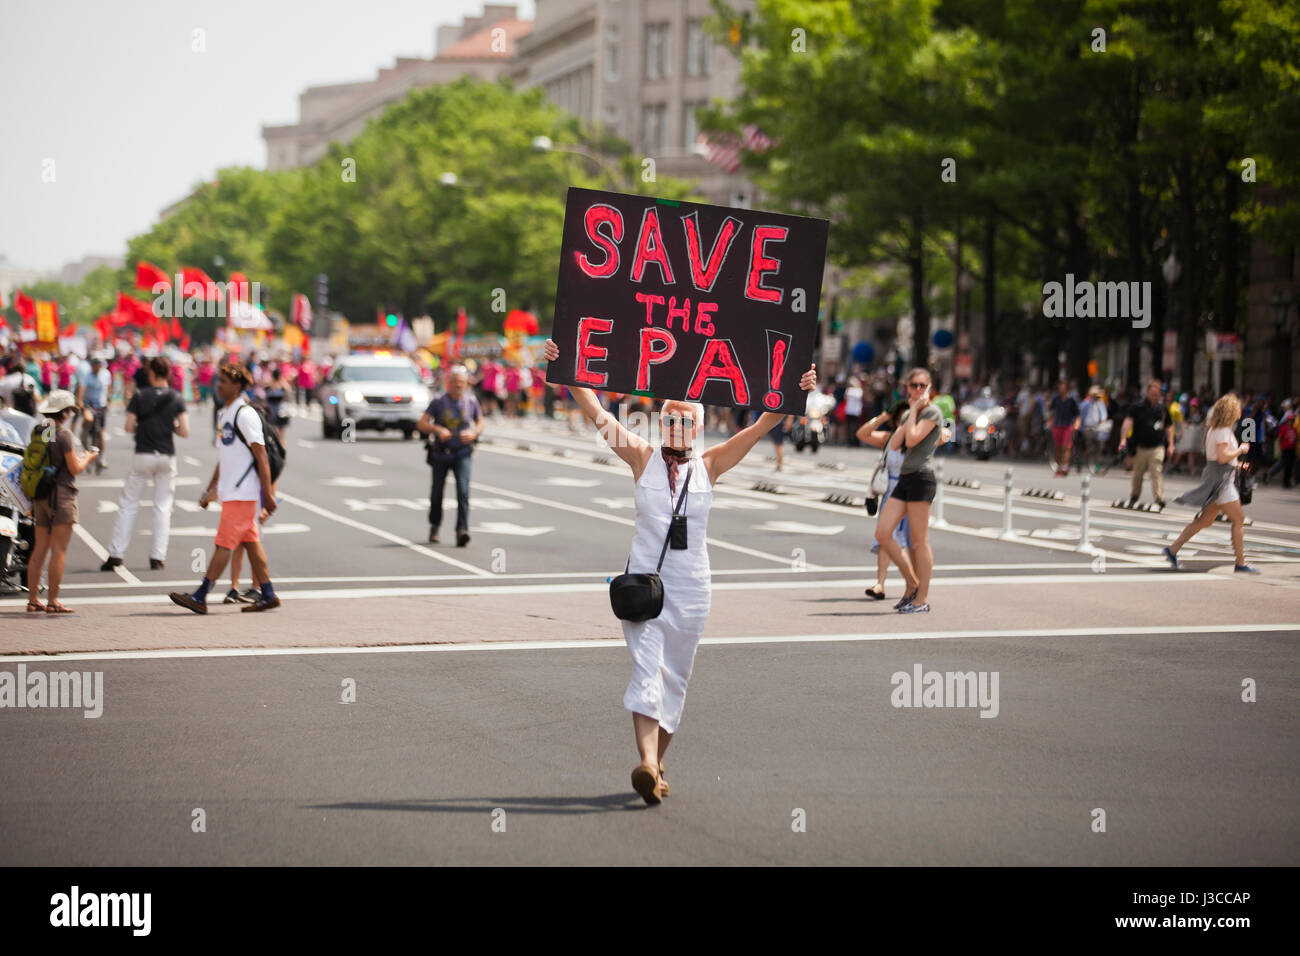 2017 People's Climate March (woman holding 'Save the EPA' sign) - Washington, DC USA Stock Photo